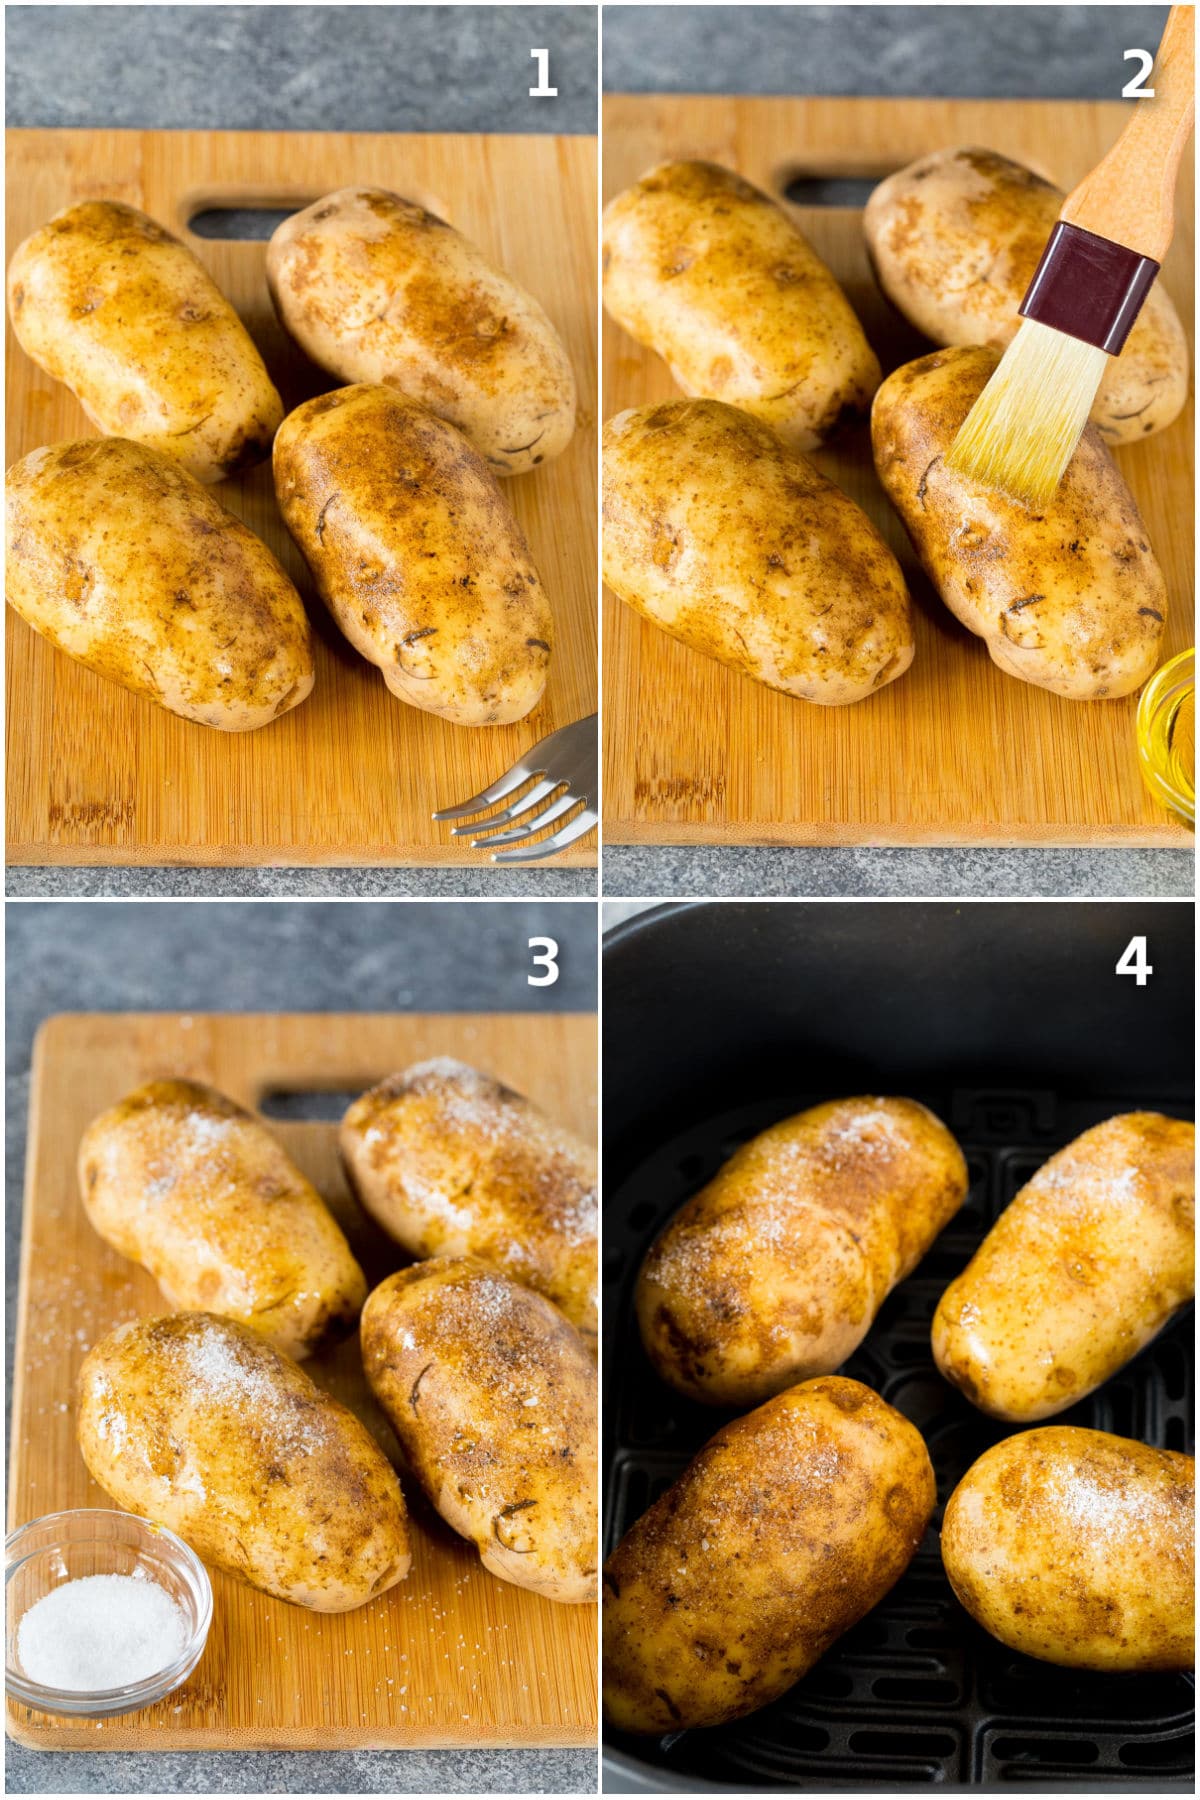 Step by step shots showing how to air fry baked potatoes.